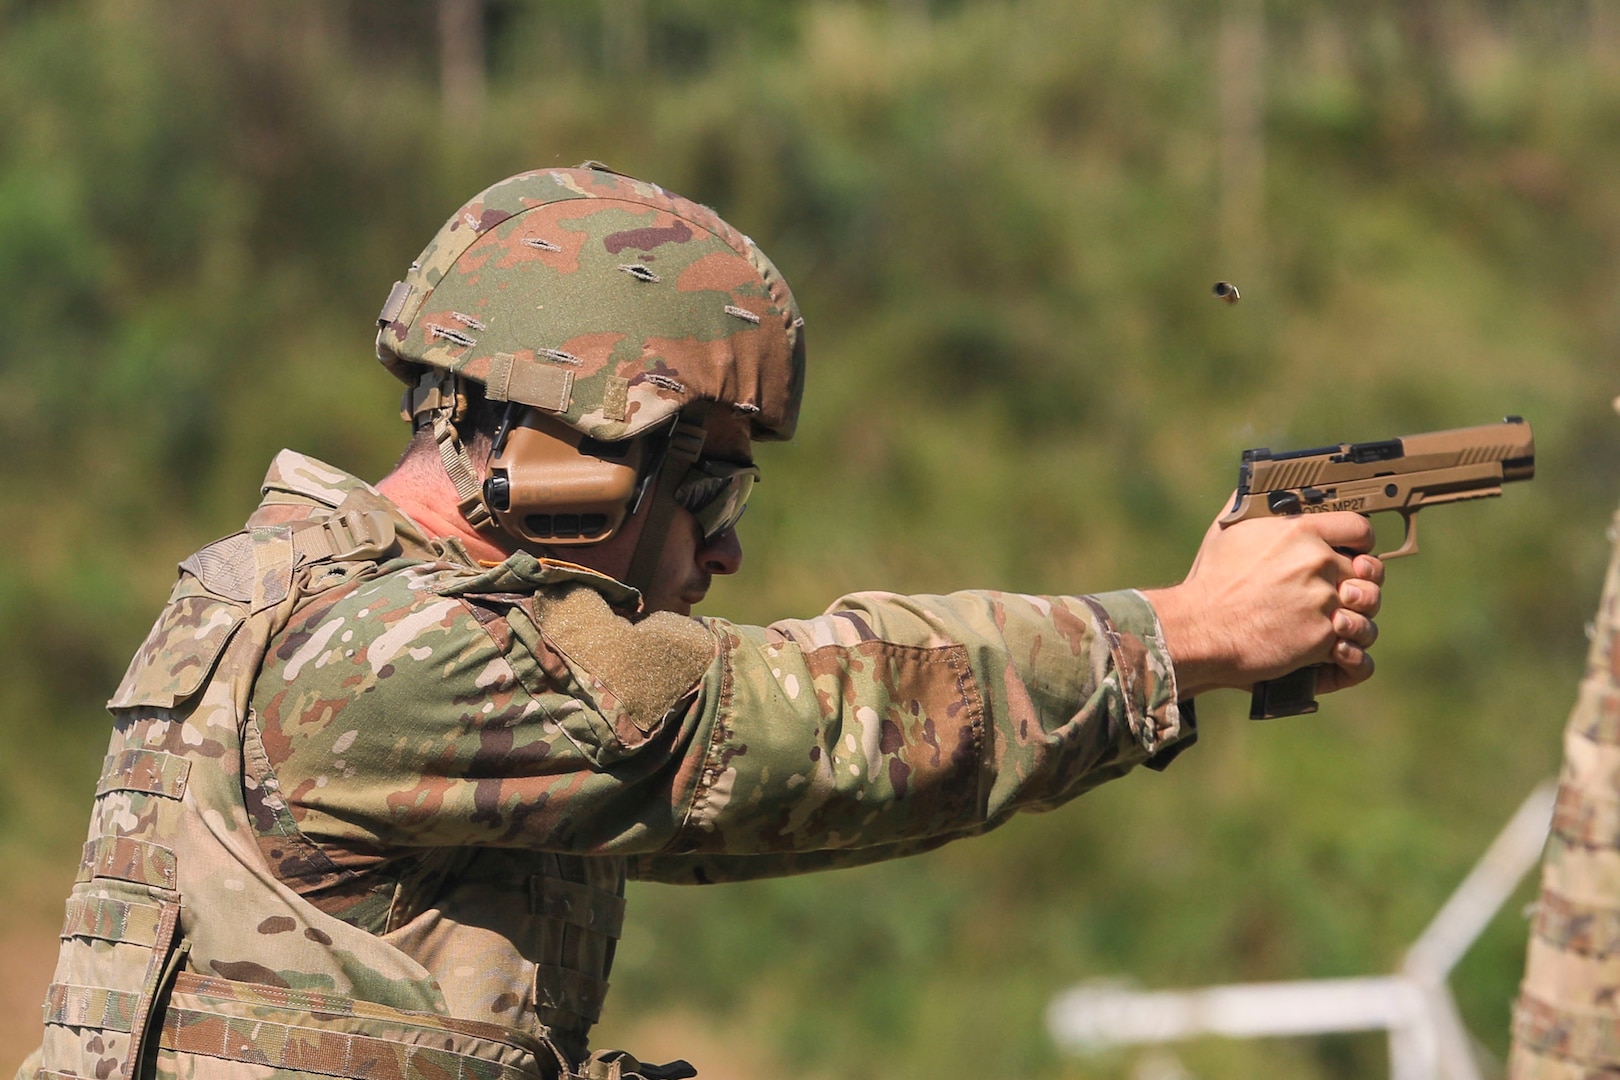 A vermont Army National Guard Soldier fire his M-17 during the individual pistol competition at the Vermont Adjutant General's 2022 Combat Marksmanship Competition held at the Ethan Allen Firing Range September 10-11, in Jericho Vermont.  (U.S. Army National Guard photo by Sgt. 1st Class Jason Alvarez)